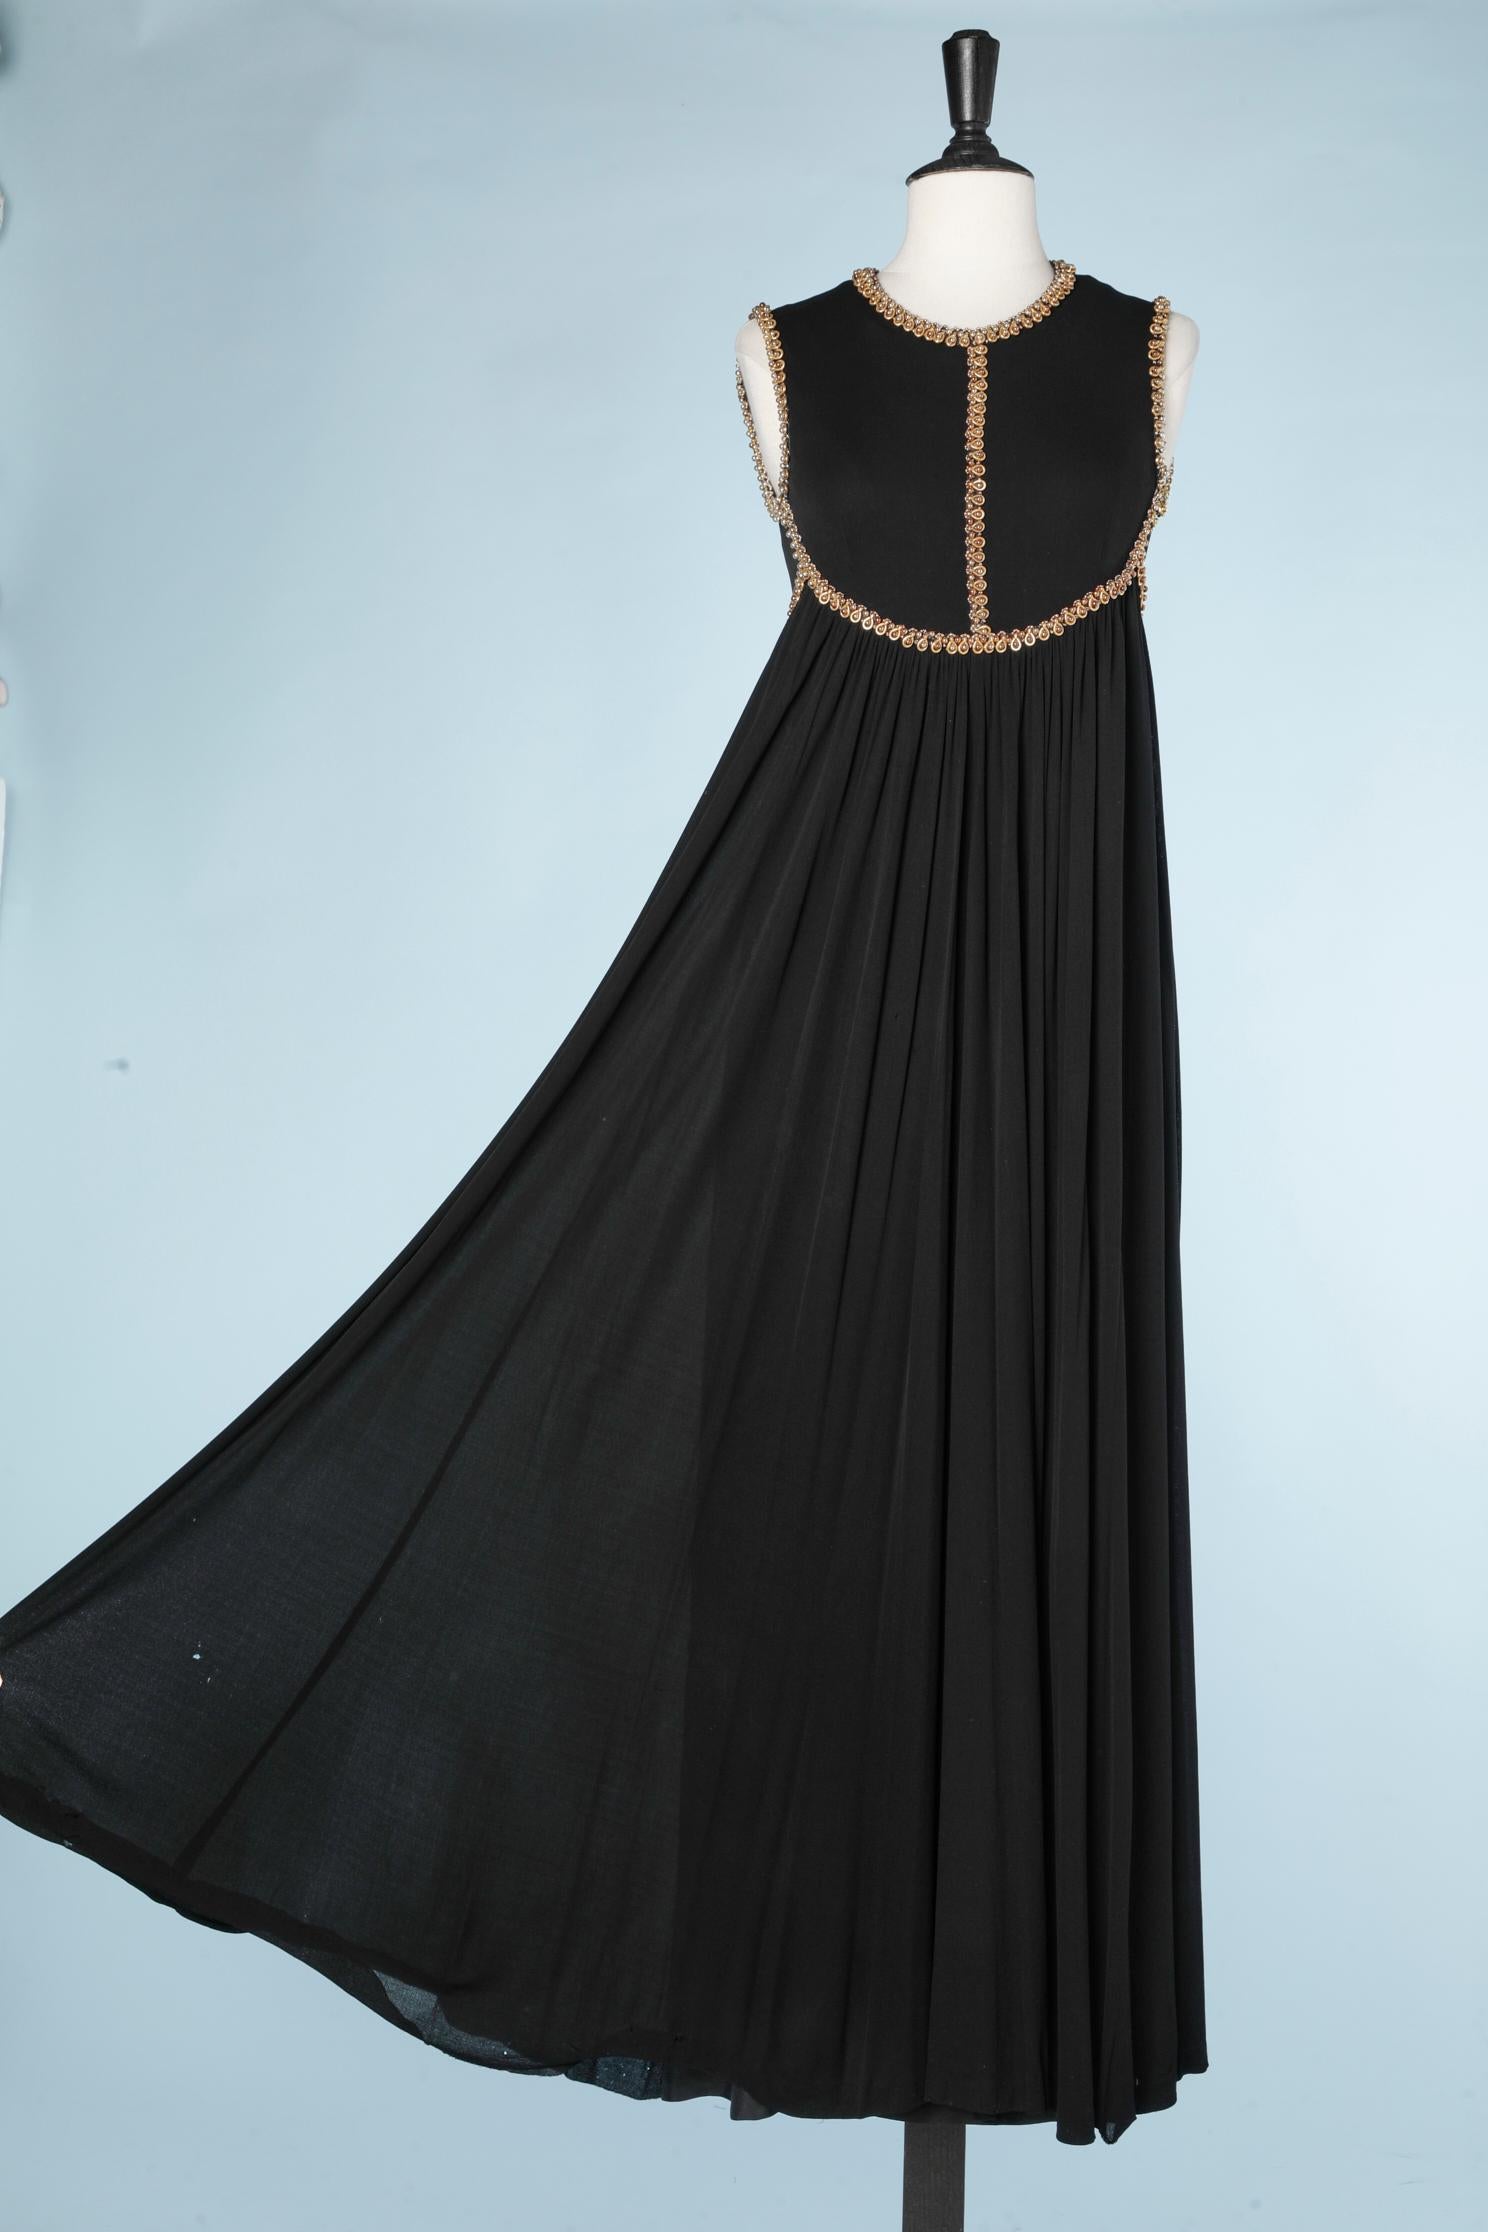 Black Long black silk jersey with gold metal decoration Christian Dior Couture numberd